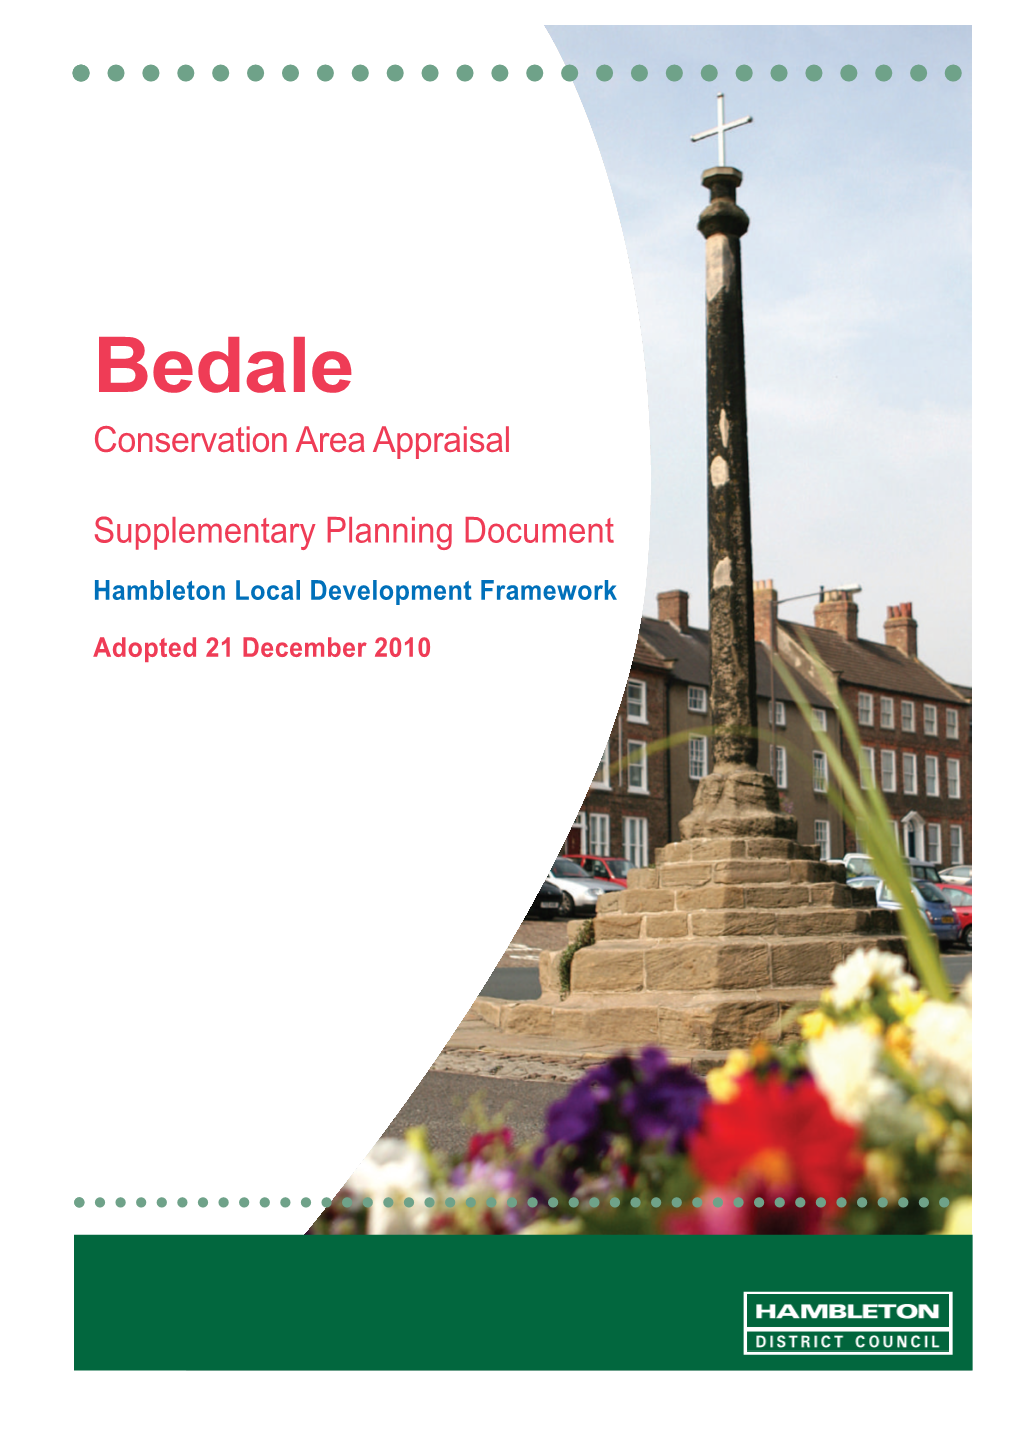 Bedale Conservation Area Appraisal